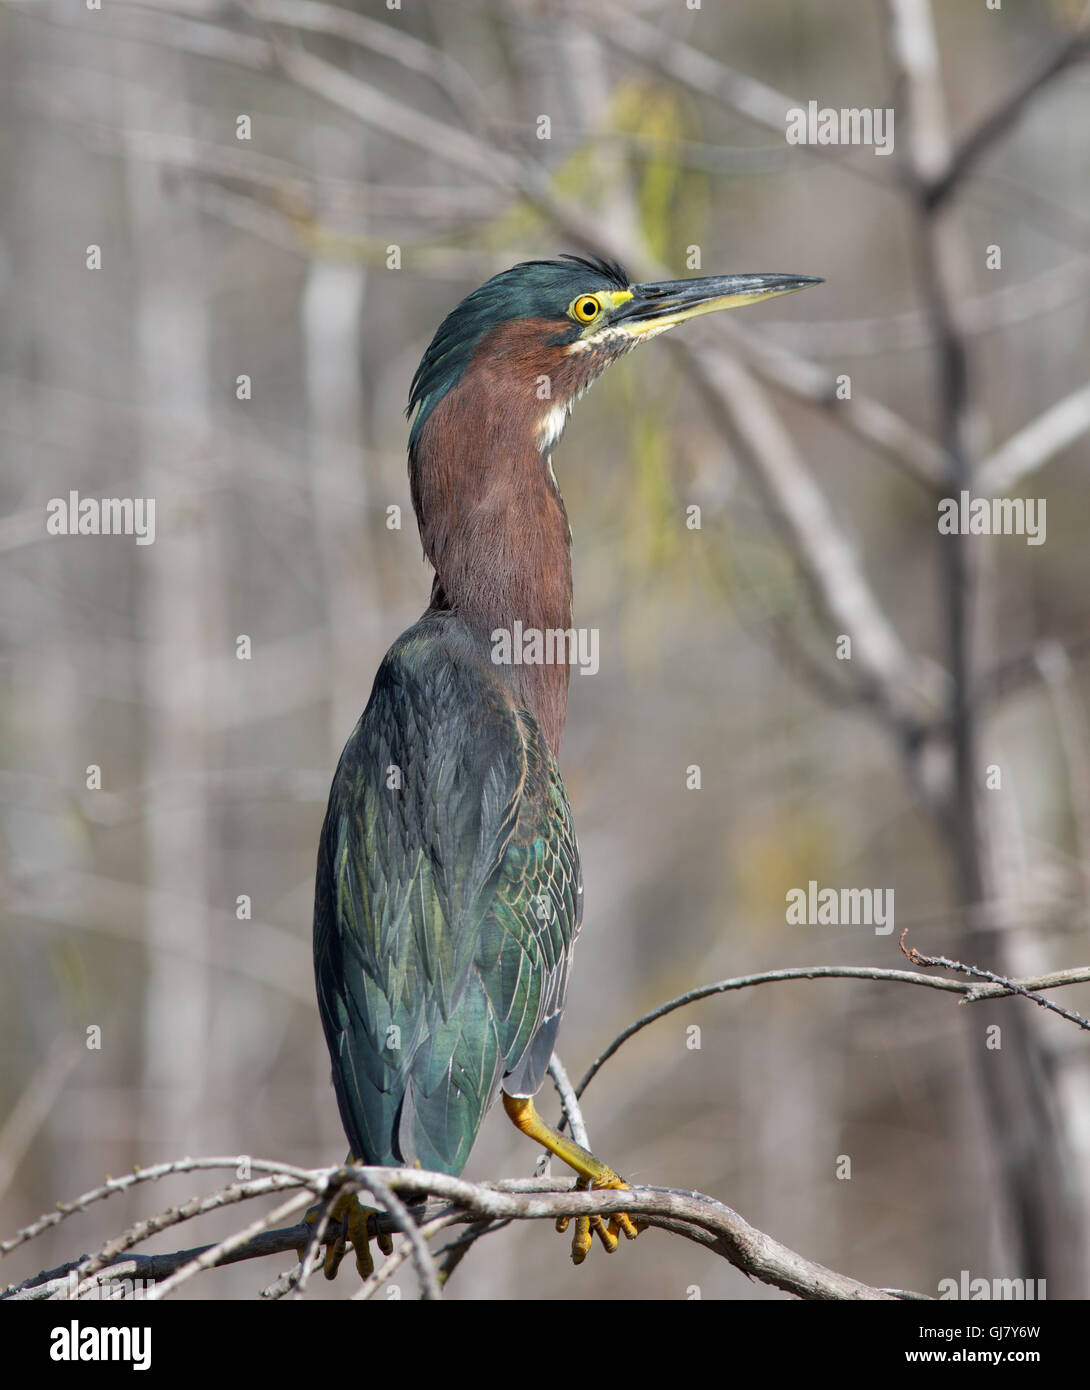 Green Heron perched on a branch of a cypress tree catches morning light revealing its lovely jewel like iridescence Stock Photo